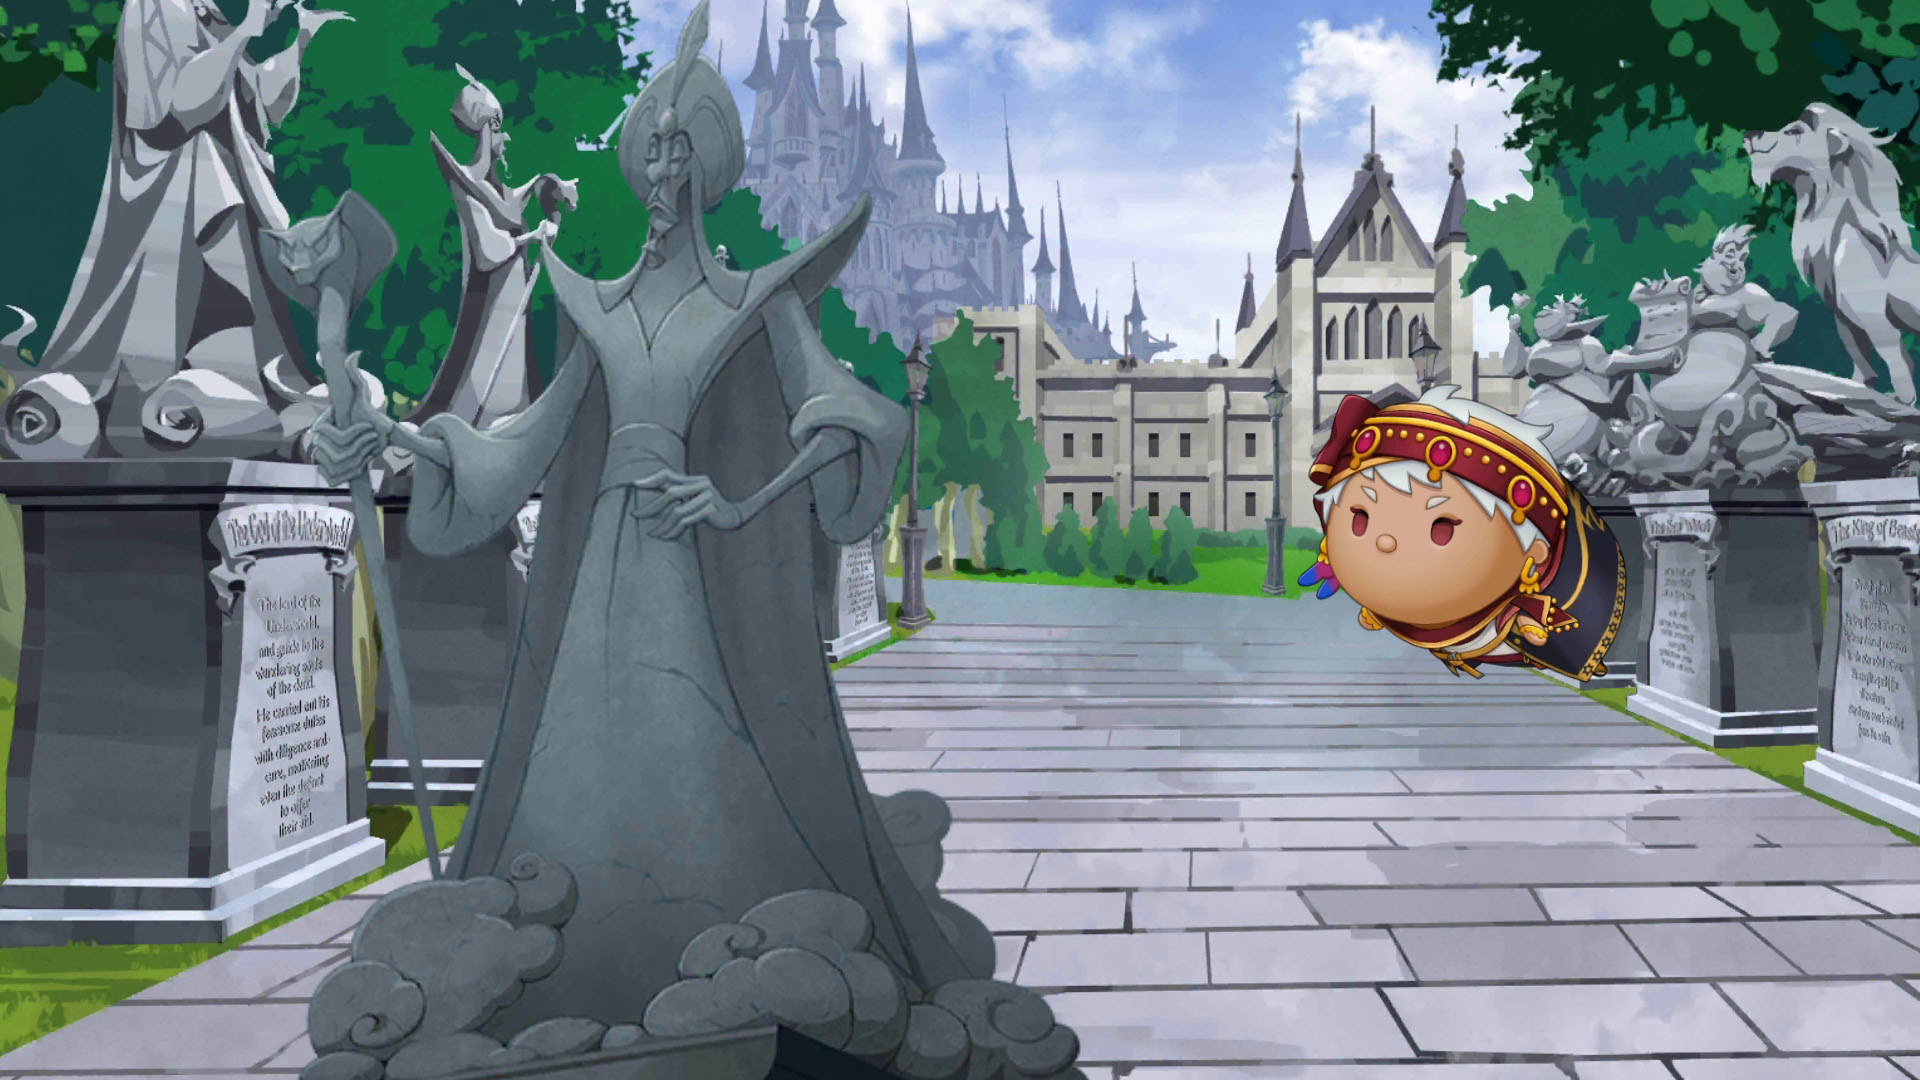 Tsum looks at Sorcerer of the Sands statue